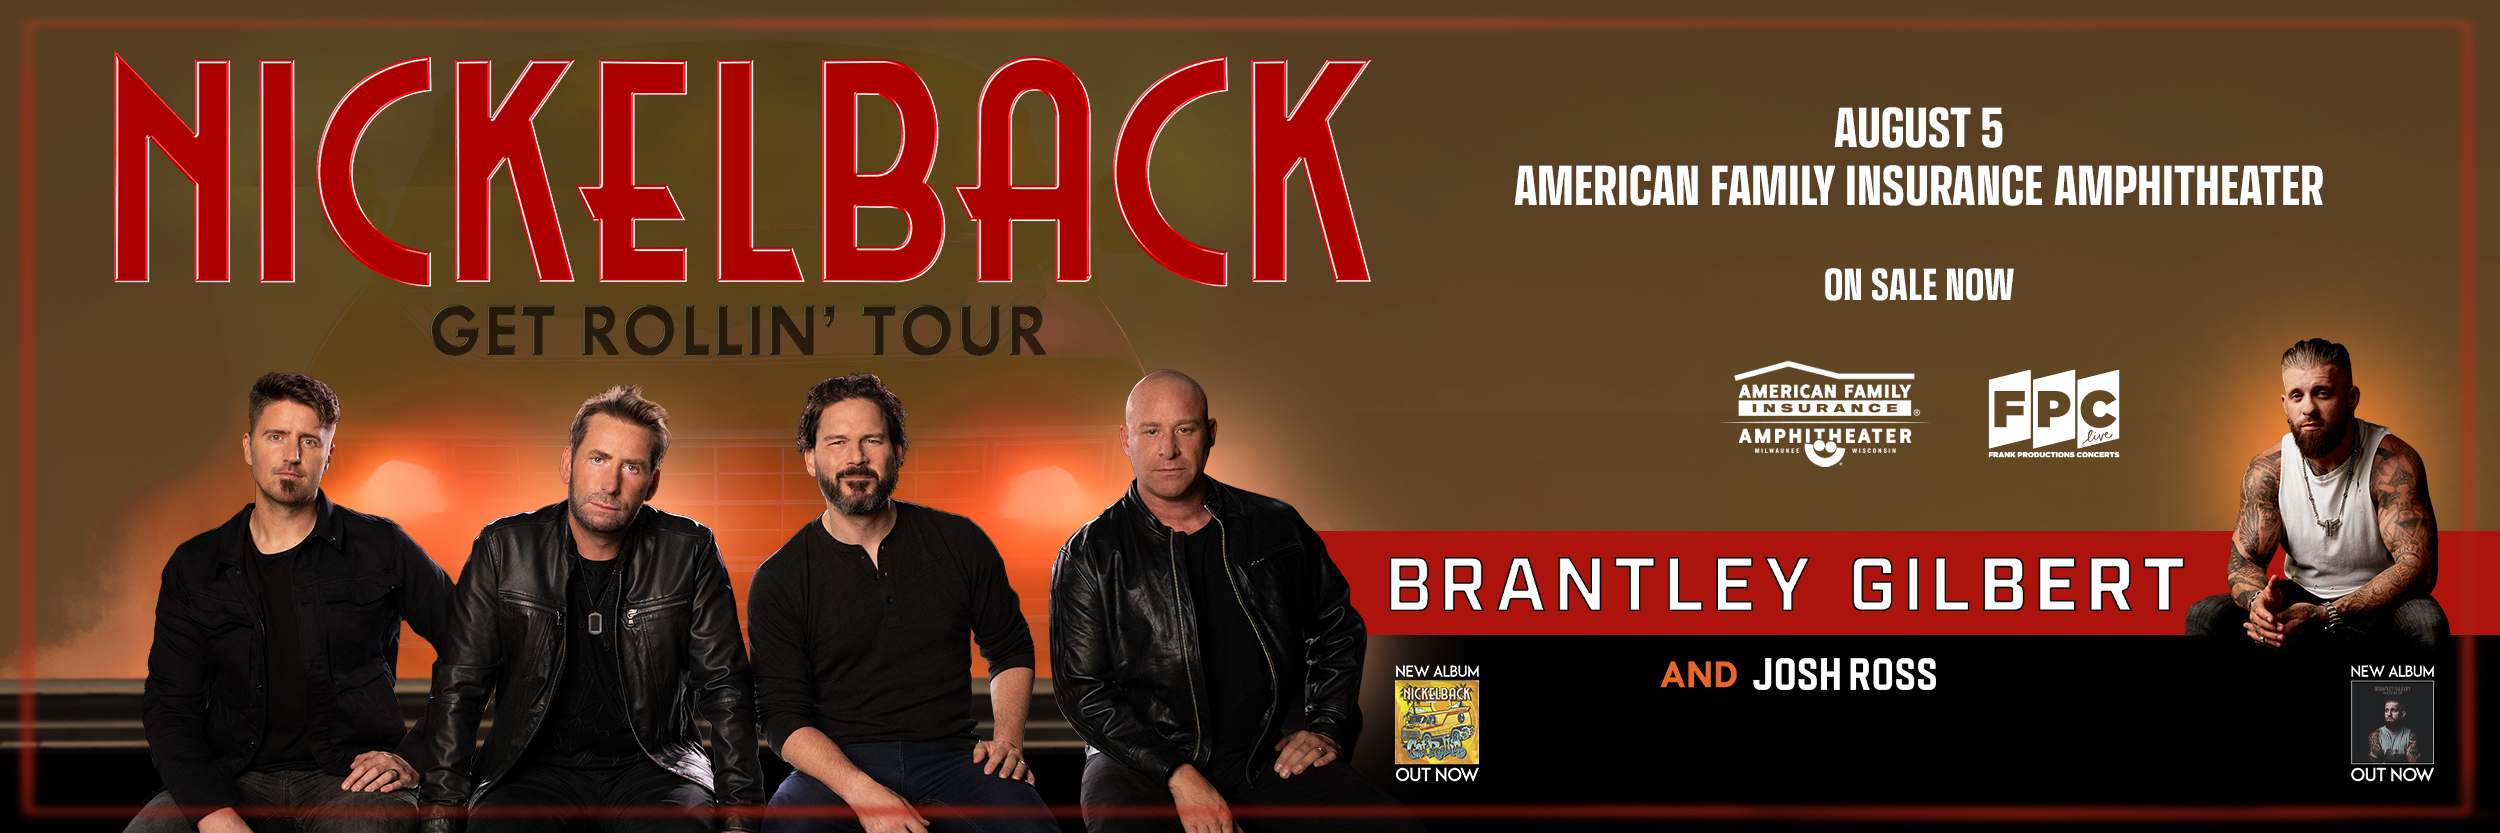 Nickelback with Brantley Gilbert live on August 5.